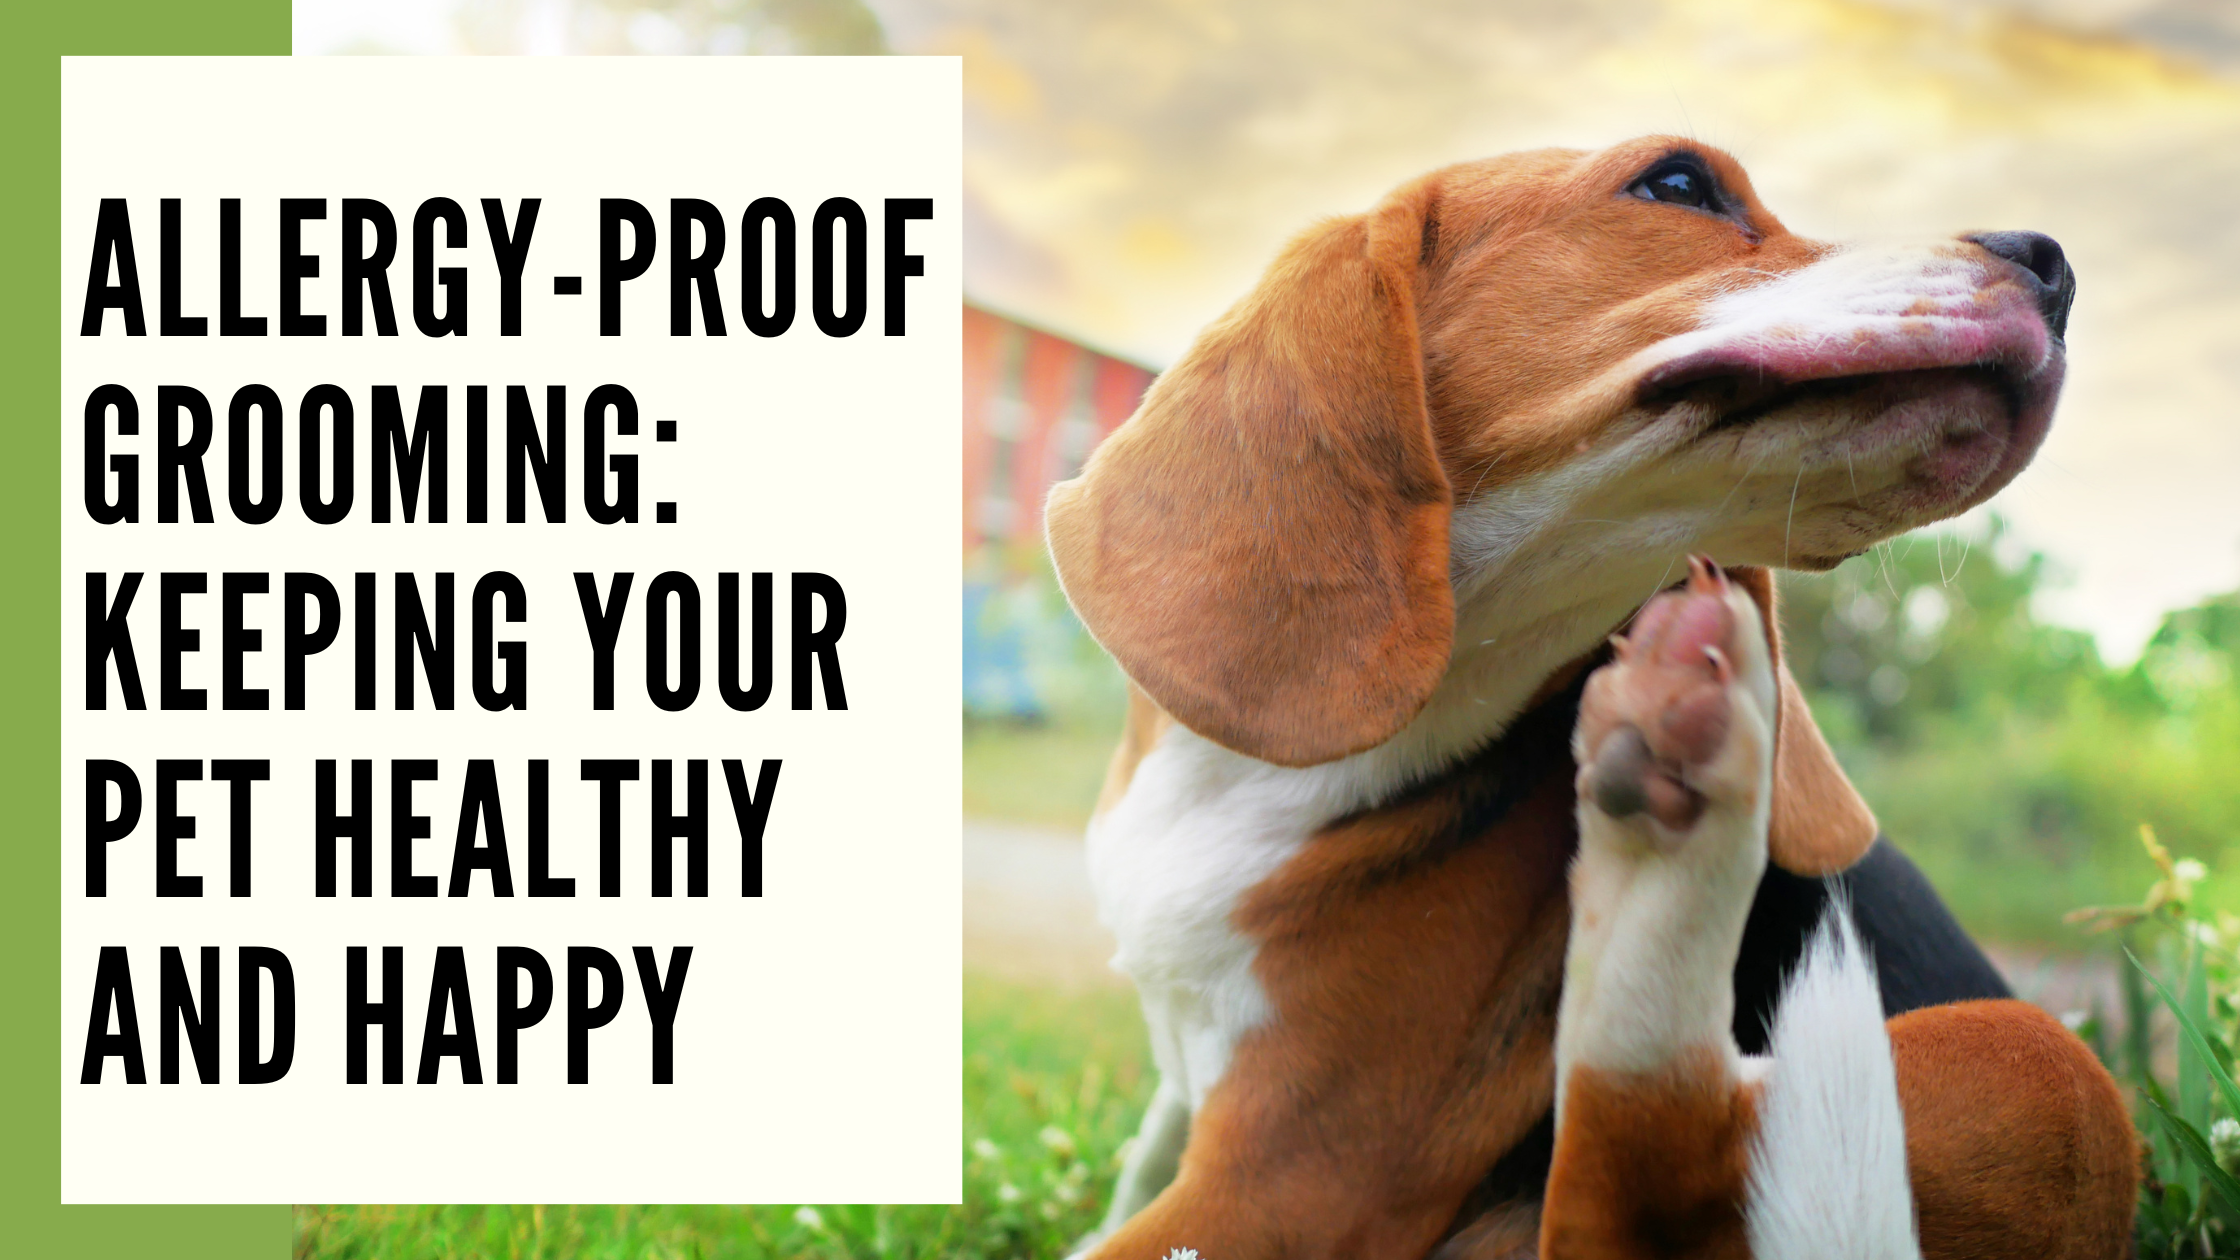 Allergy-Proof Grooming Keeping Your Pet Healthy and Happy